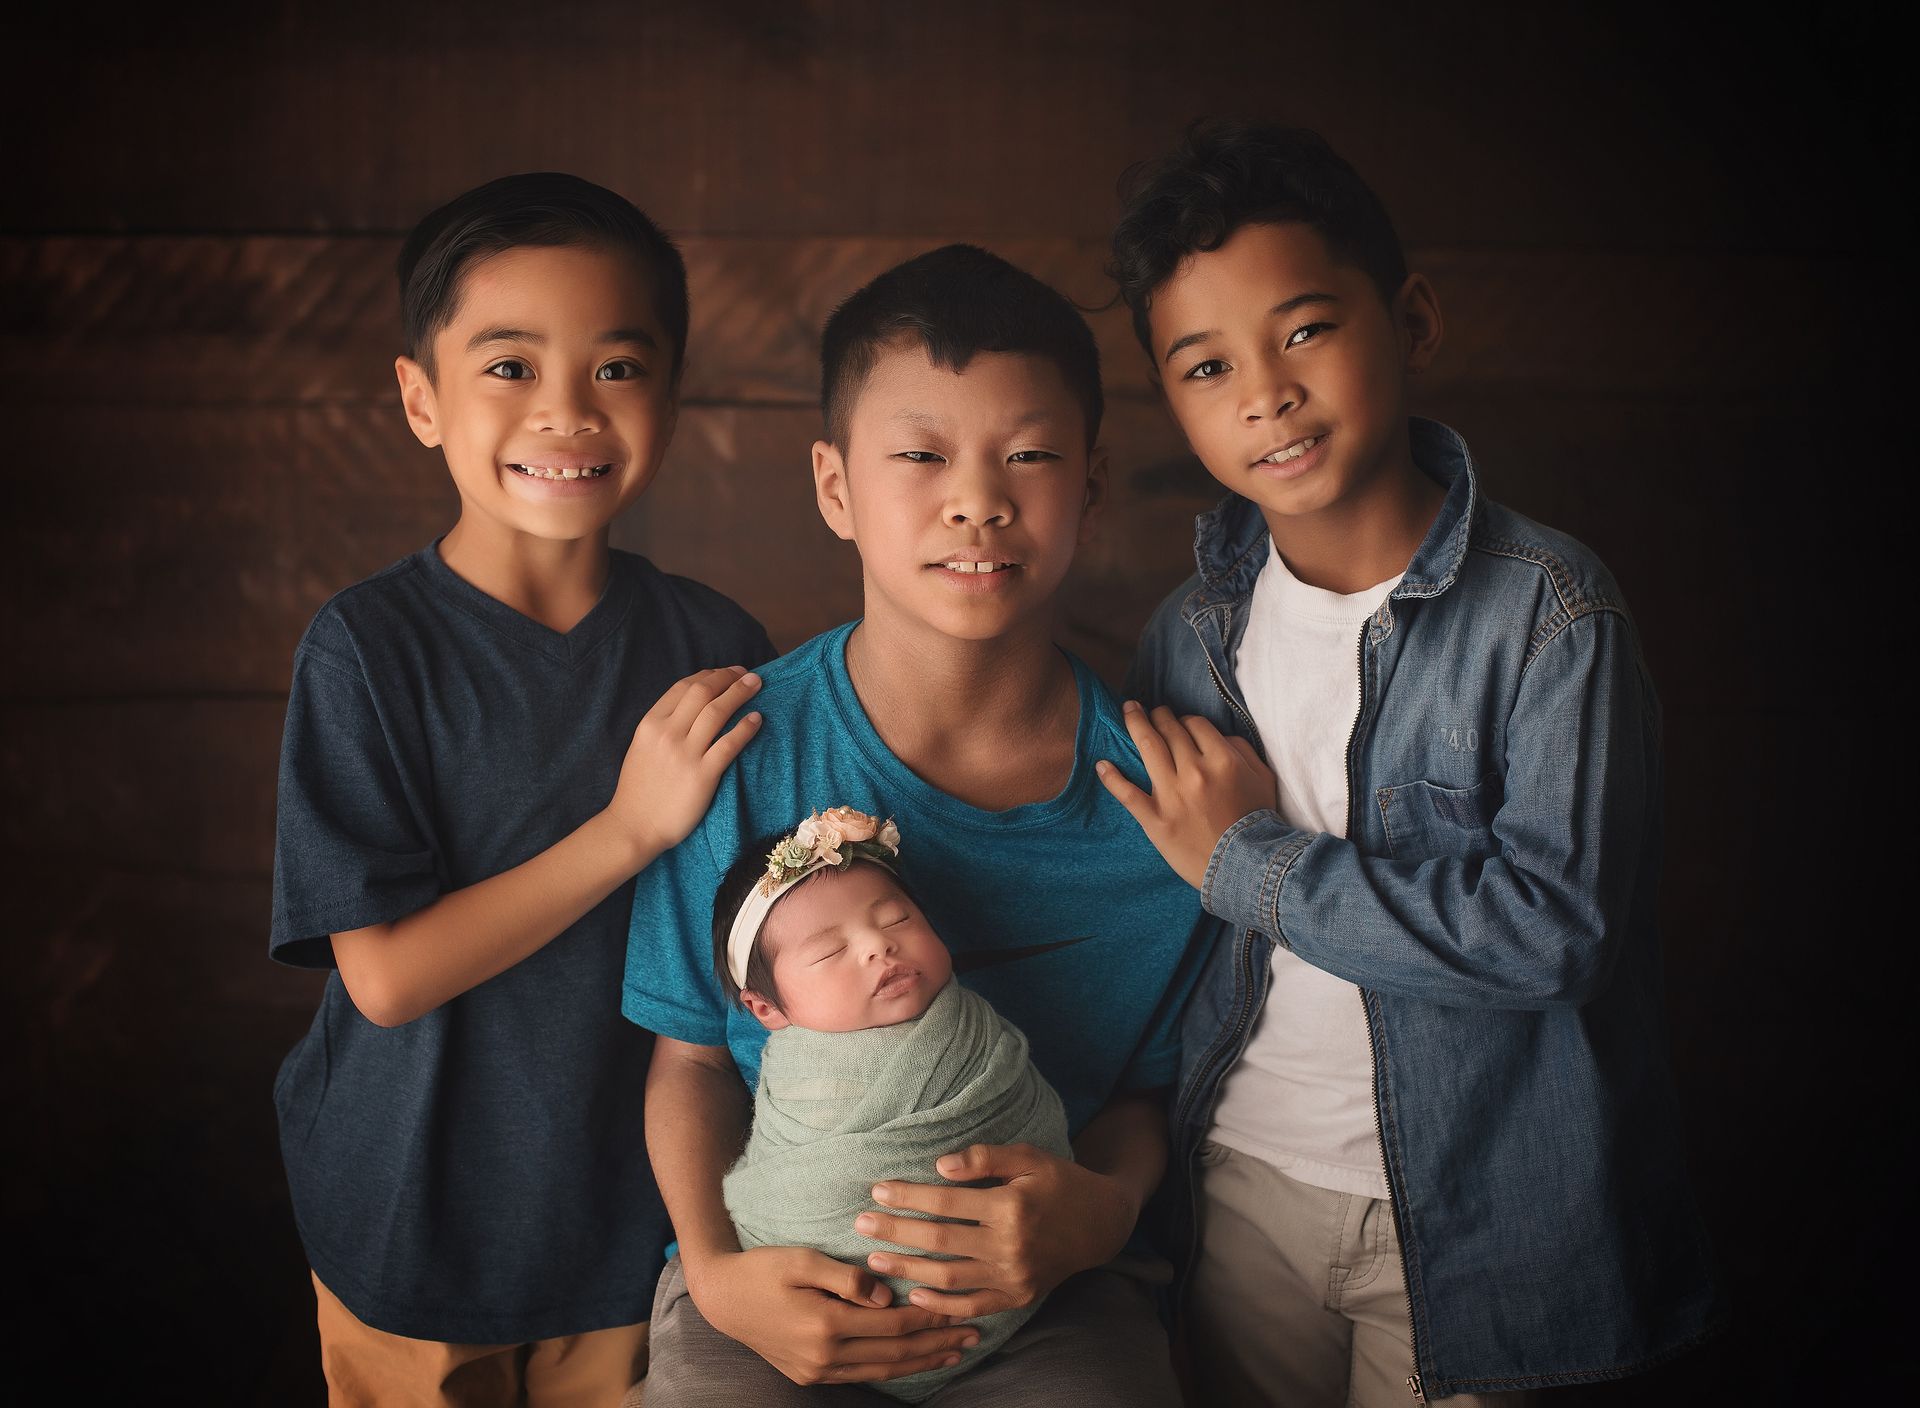 Three boys are holding a newborn baby in their arms.